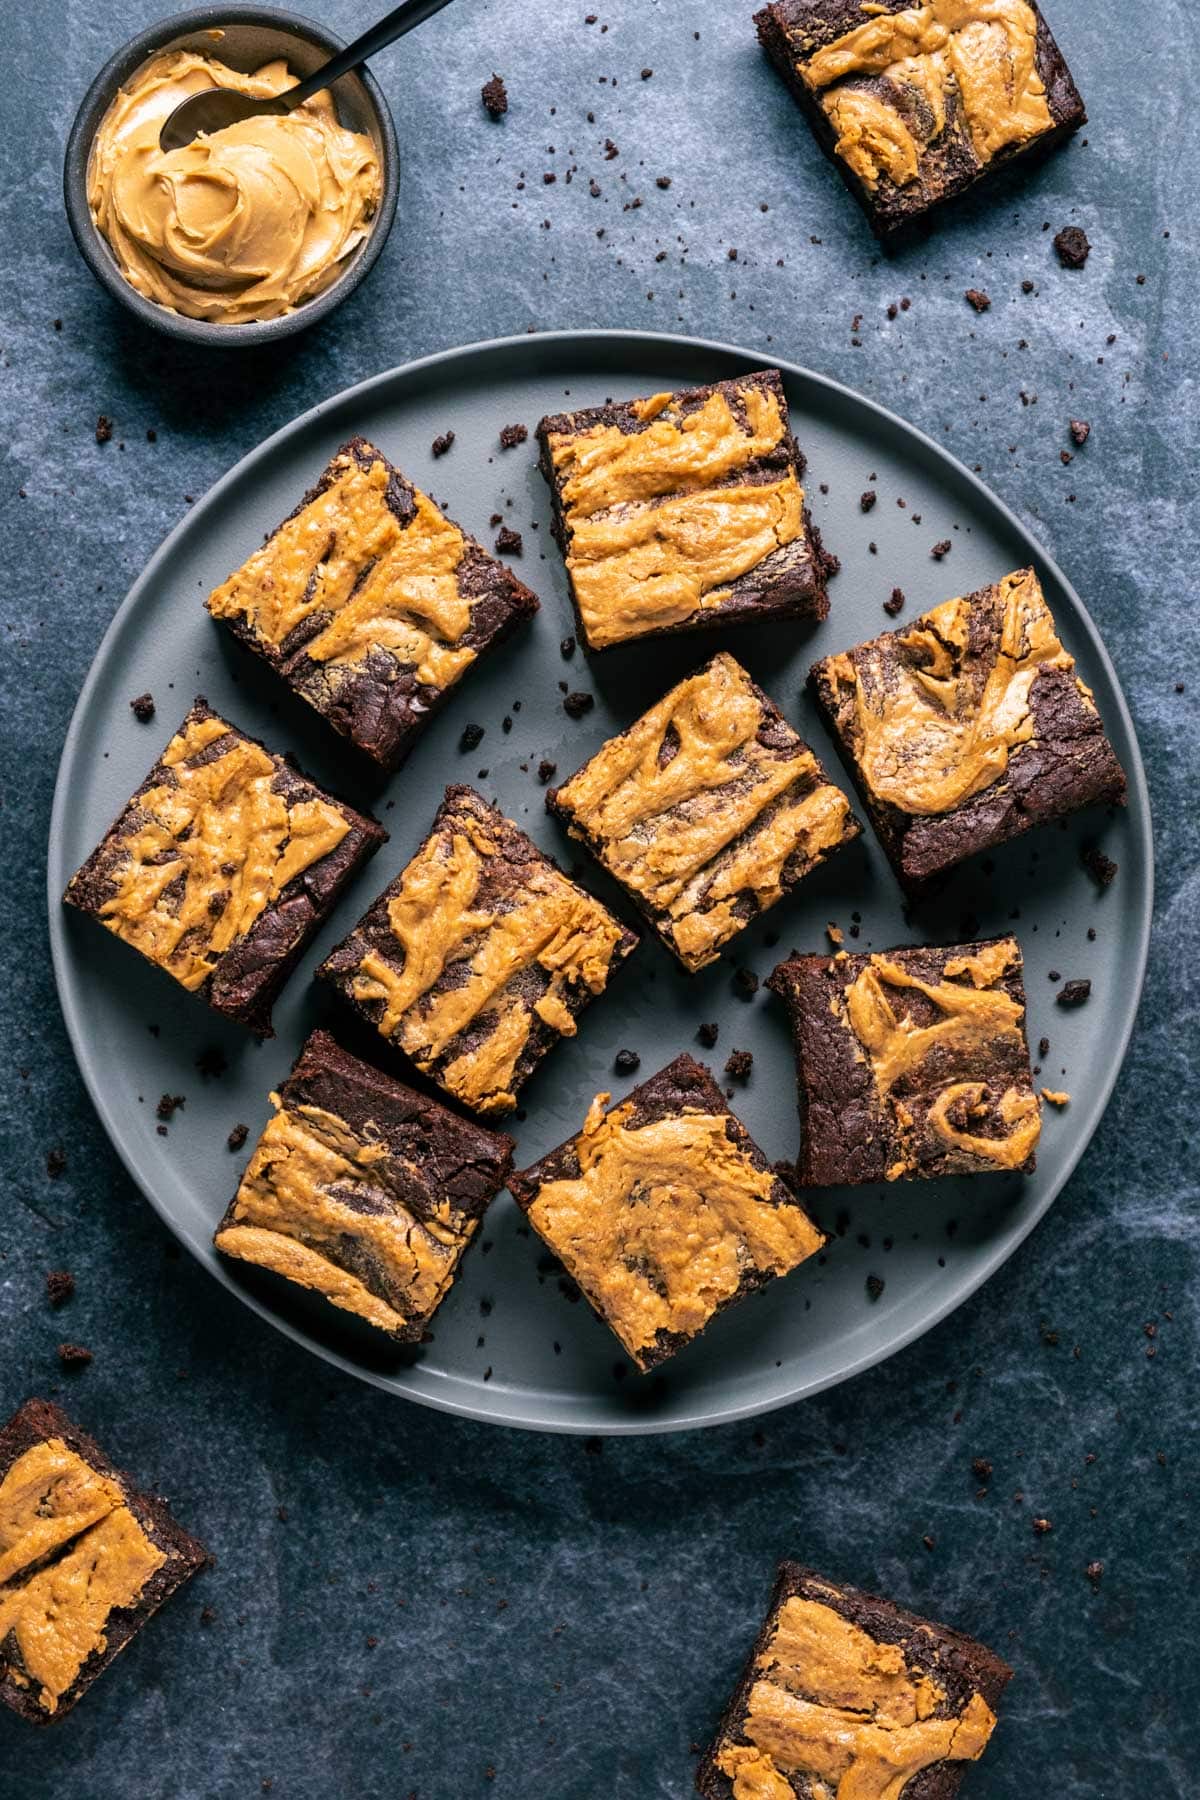 Peanut butter brownies on a gray plate.